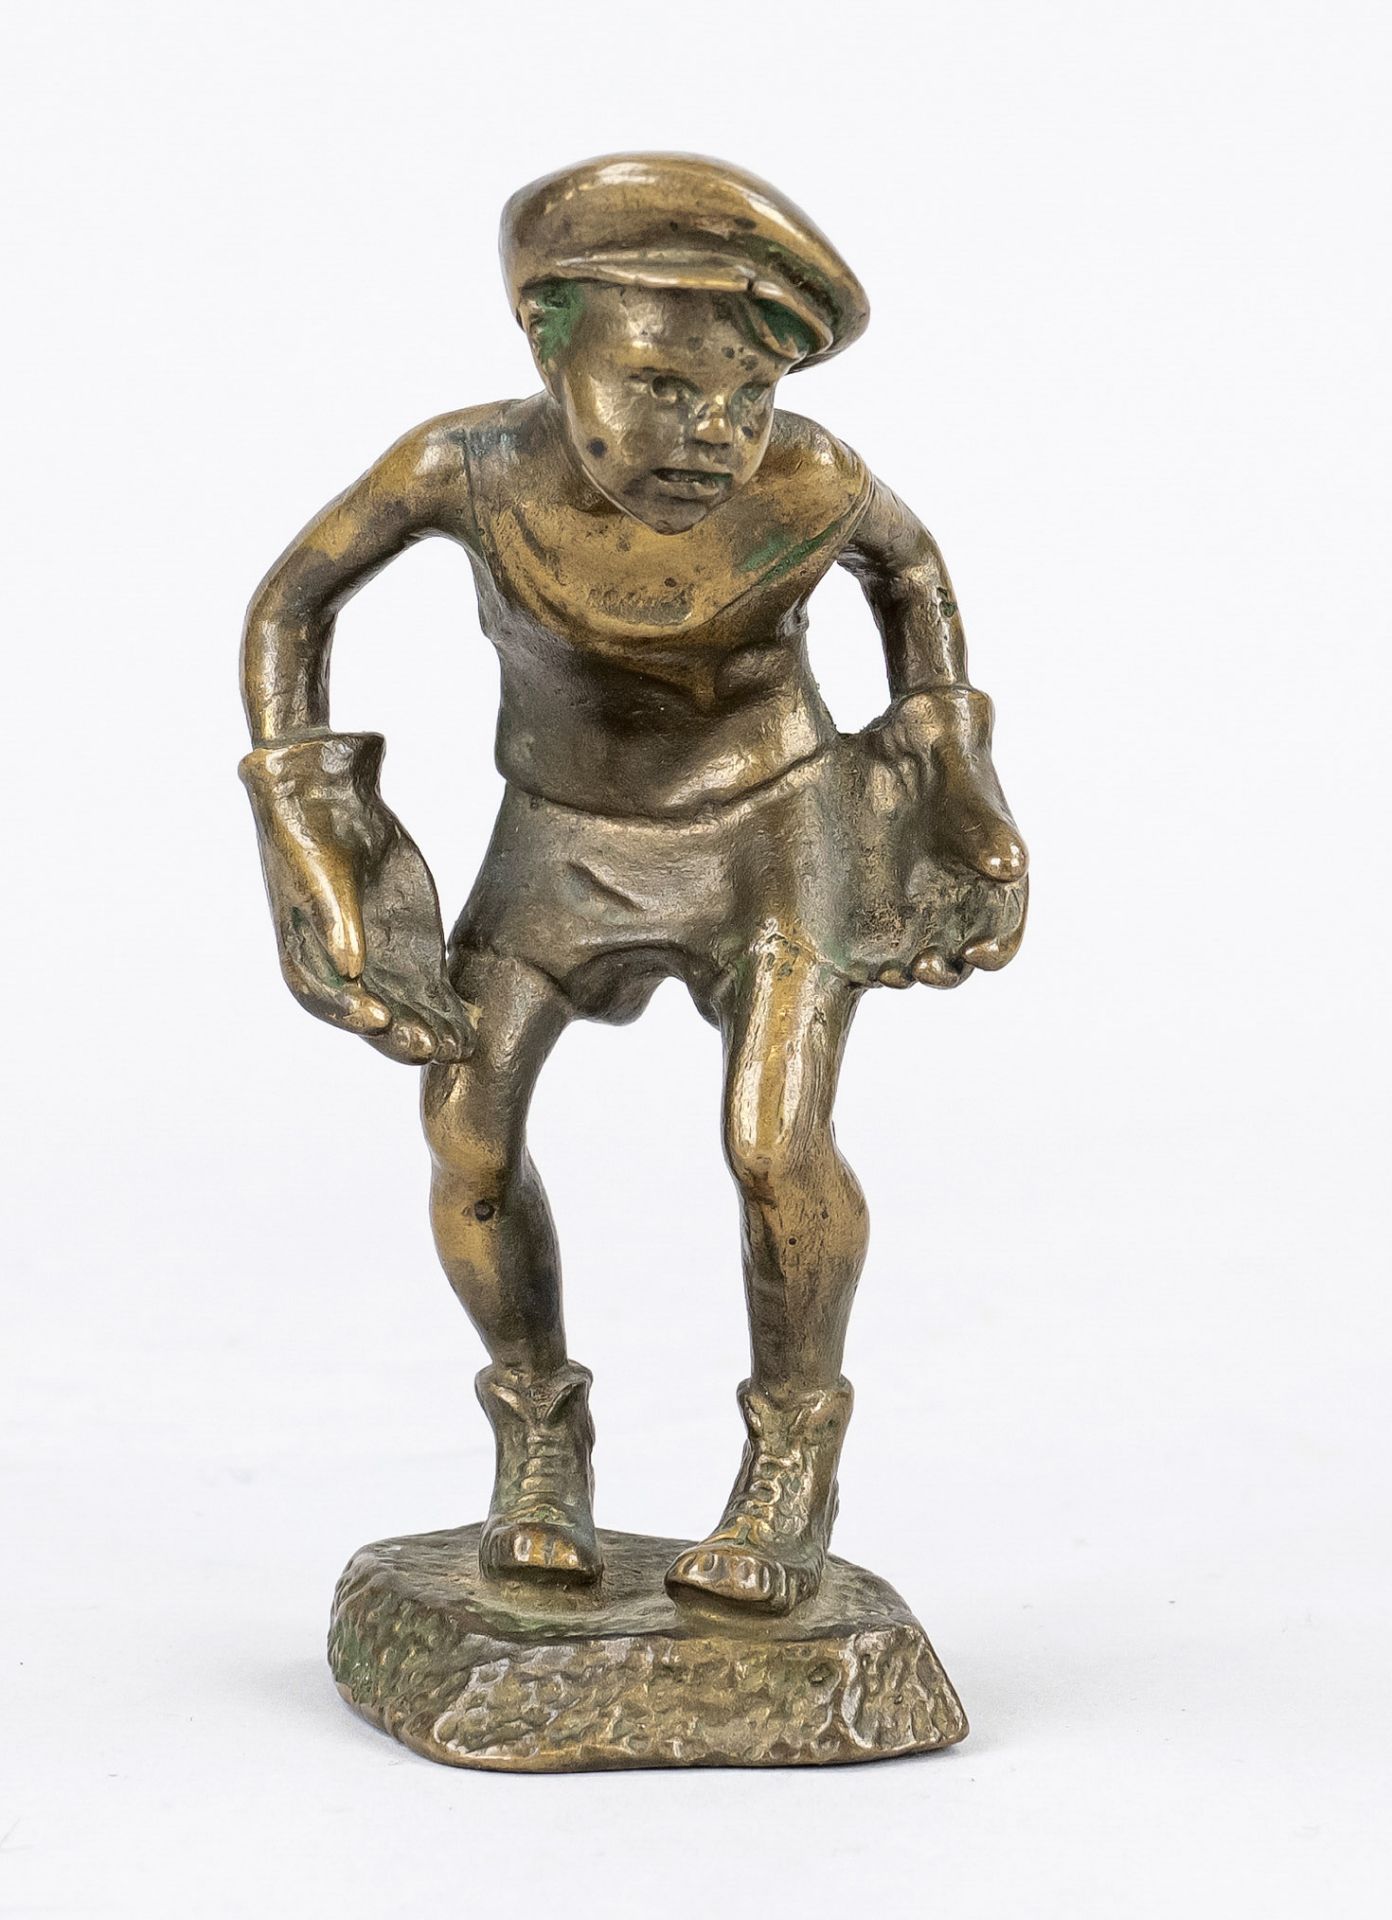 Soviet sculptor of the 20th century, small goalkeeper, greenish patinated bronze on a naturalistic